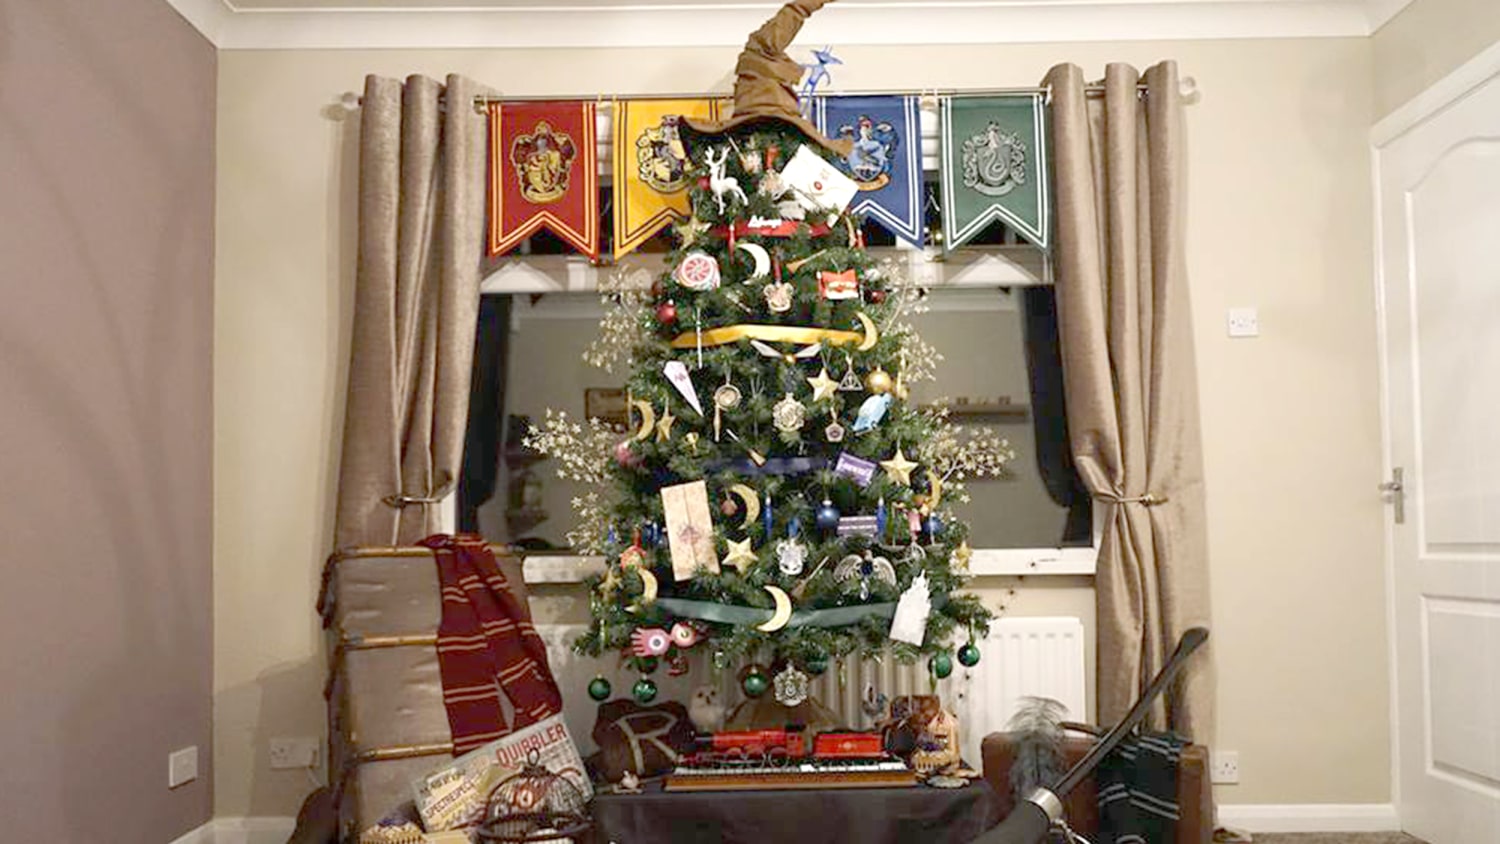 Harry Potter Christmas Decorations